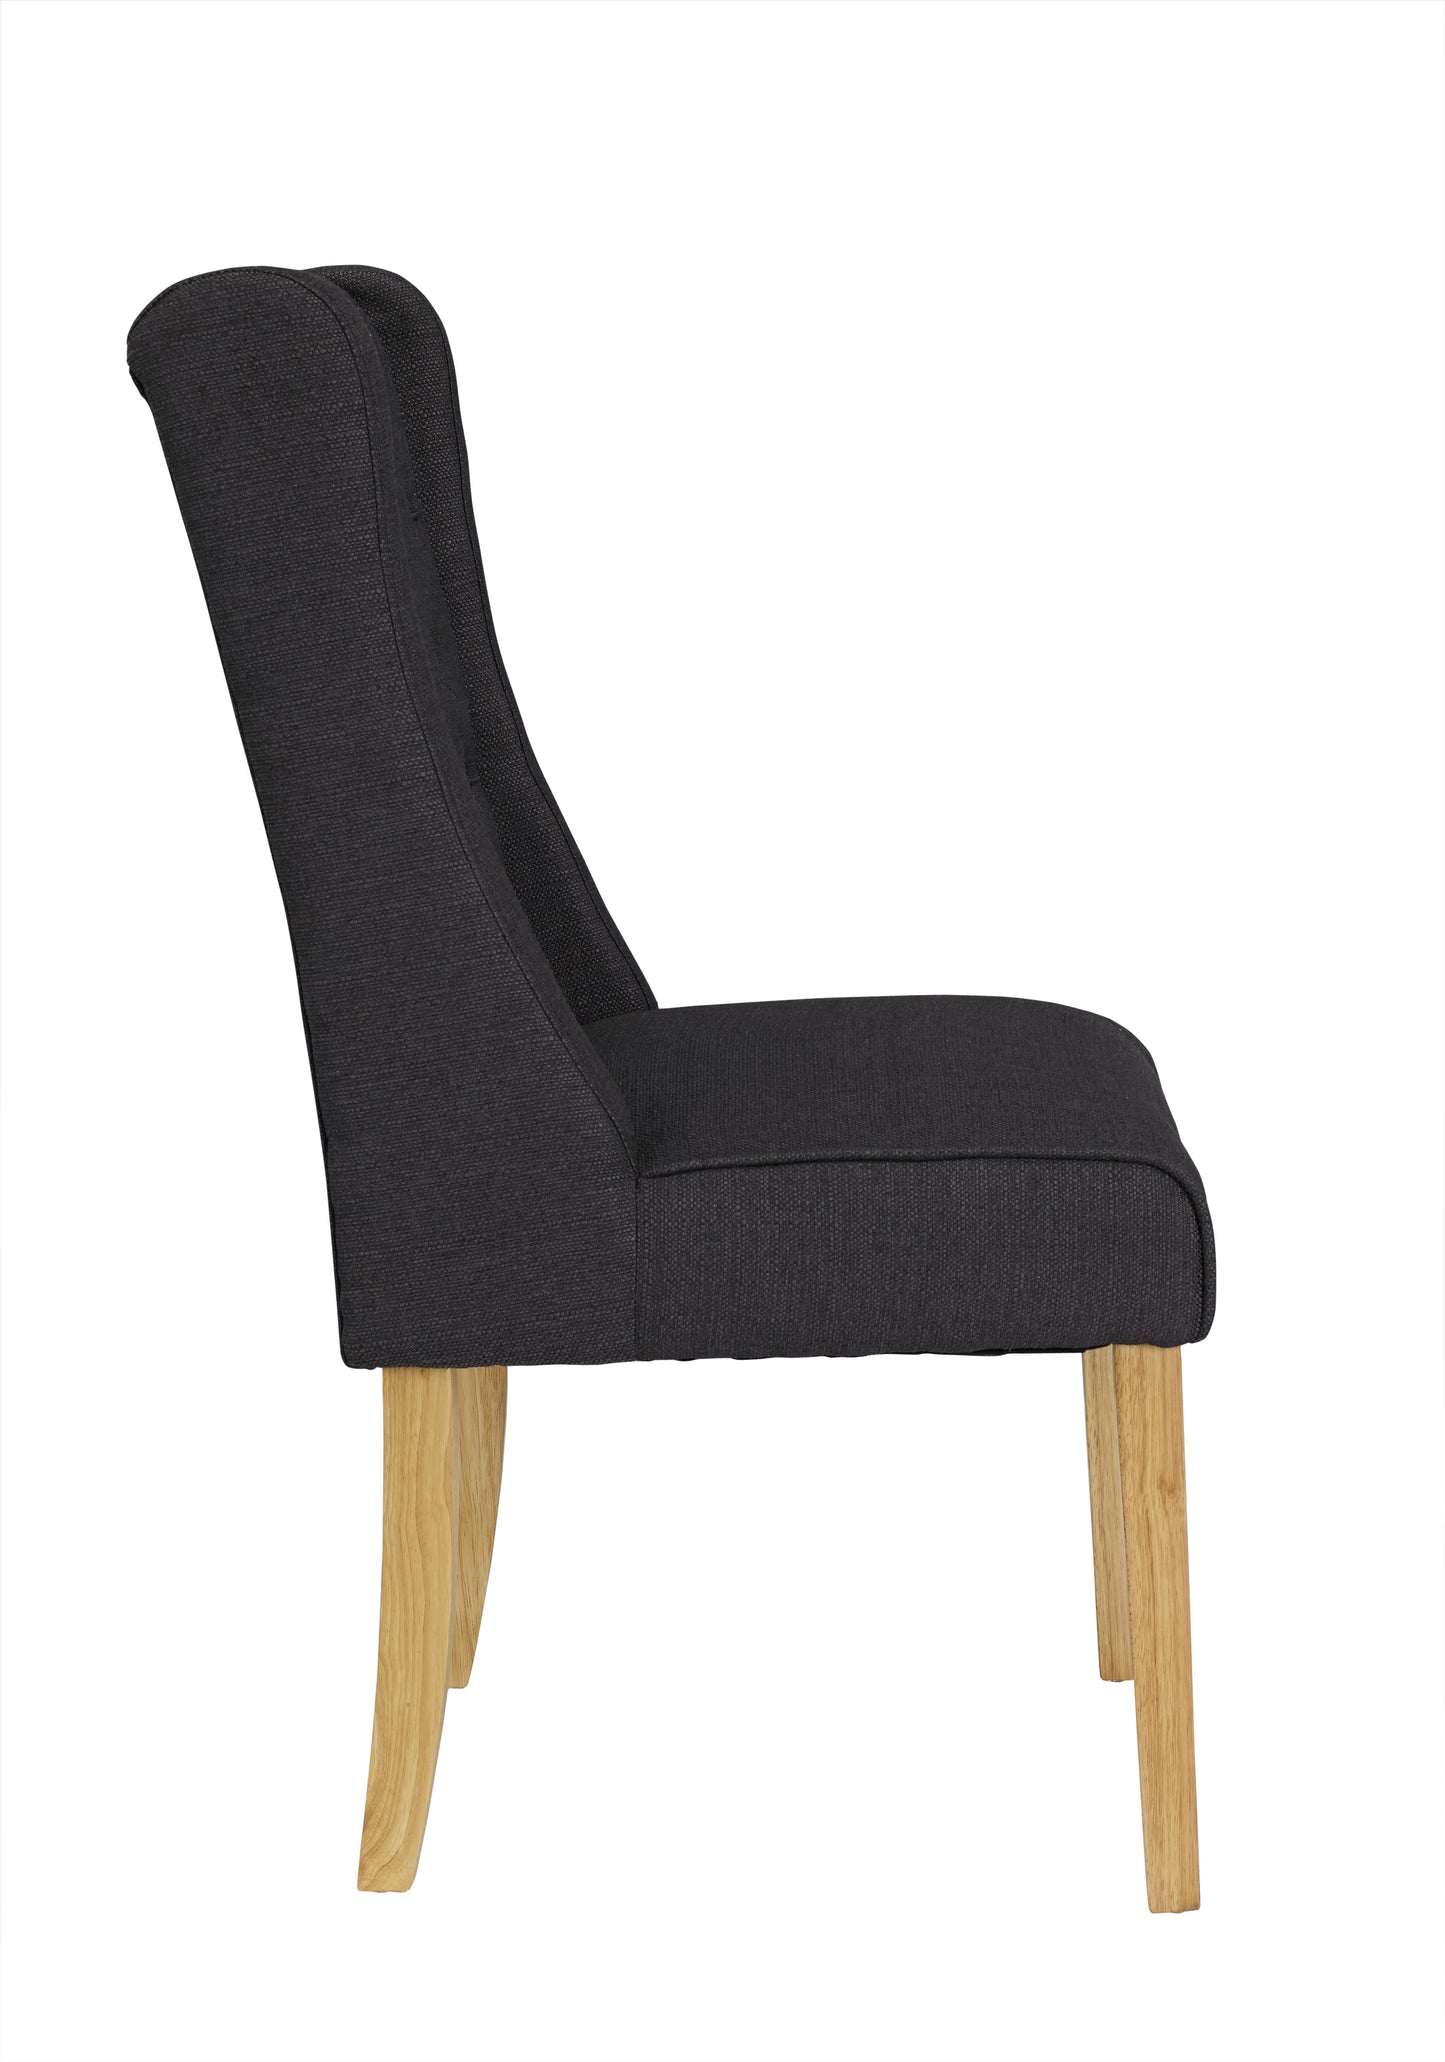 Verona Dining Chair in Charcoal (2 Pack)